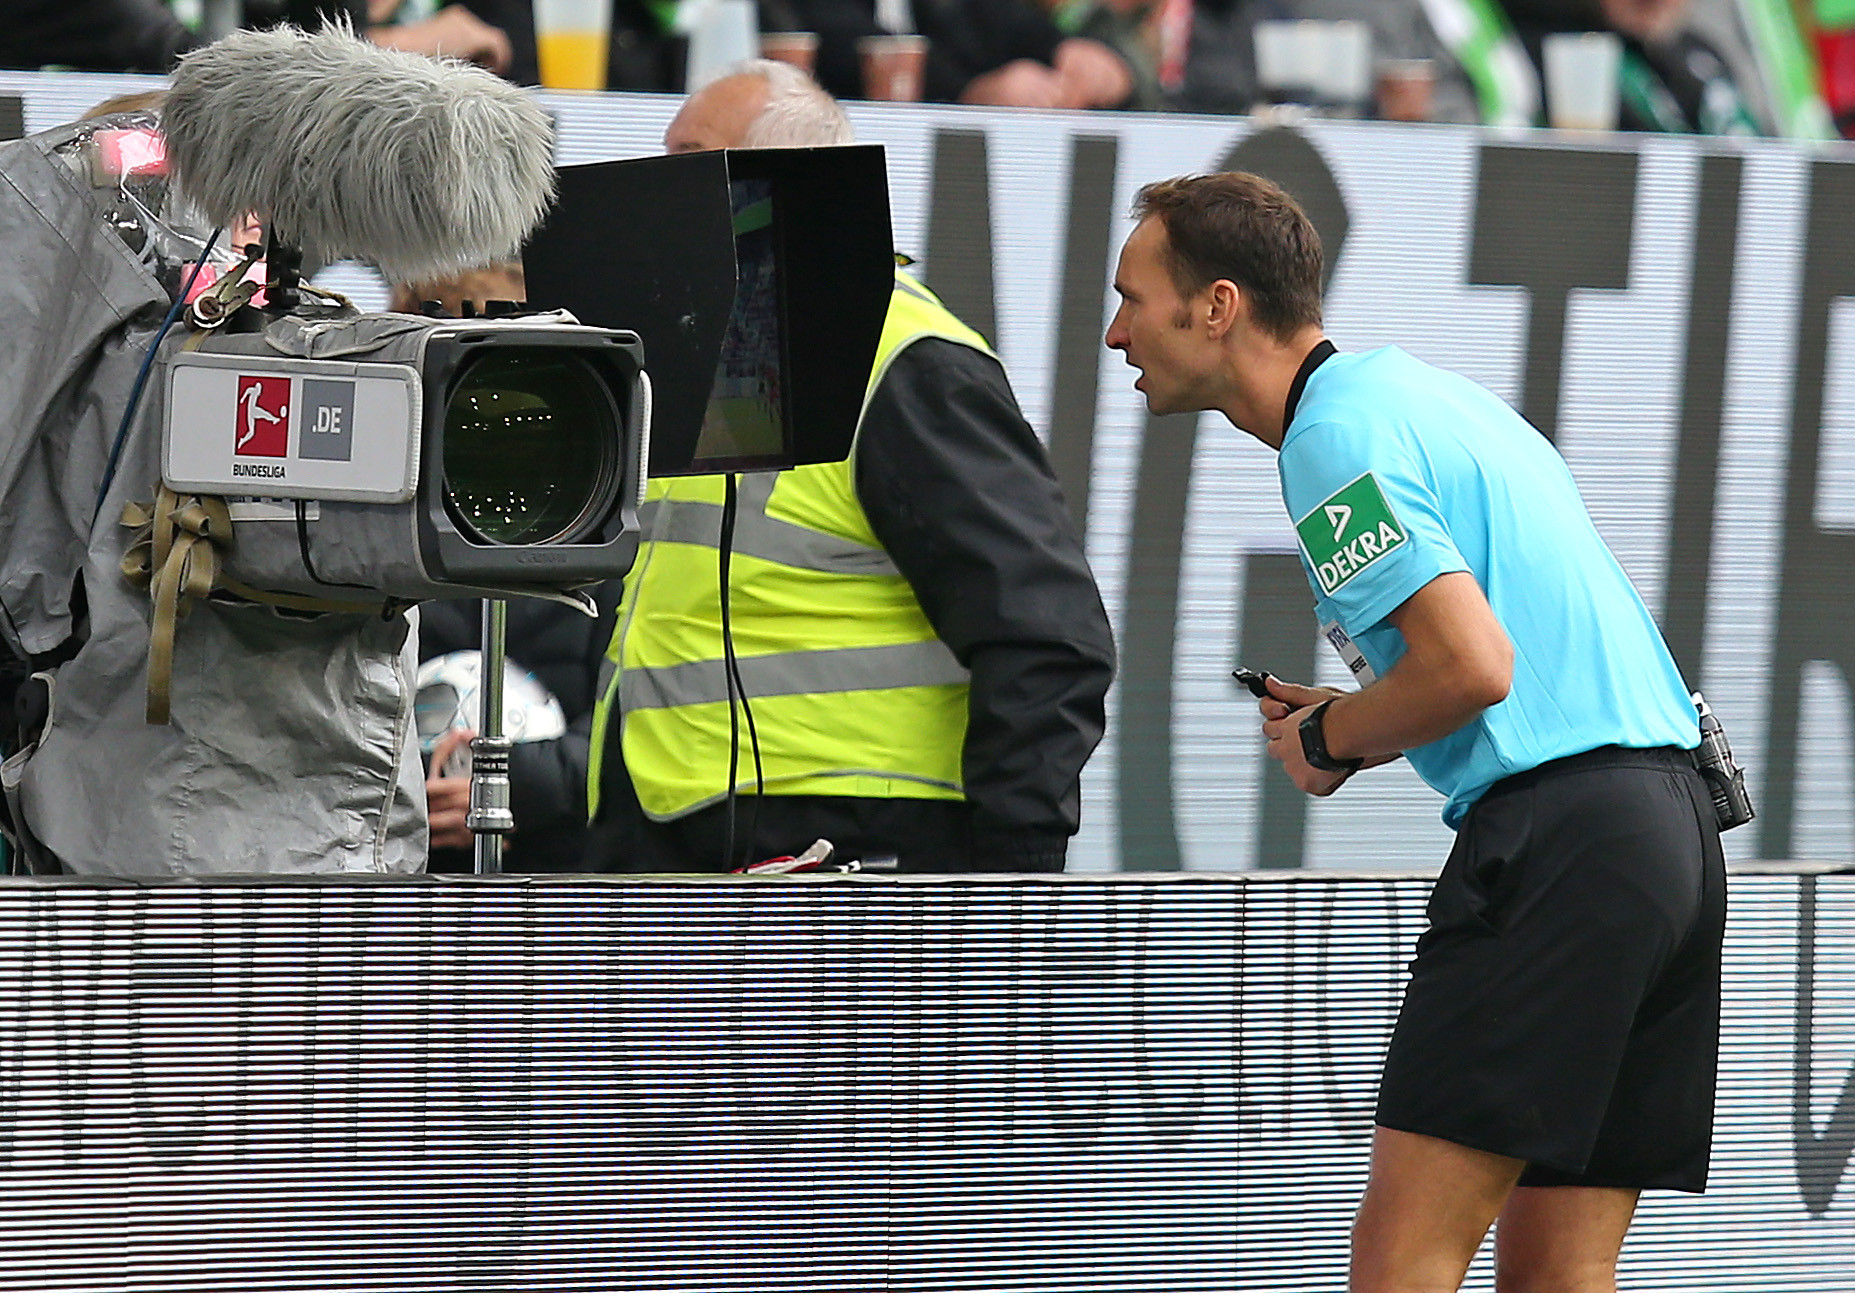 In leagues around Europe, the referee consults VAR directly via a pitch-side video ©Getty Images